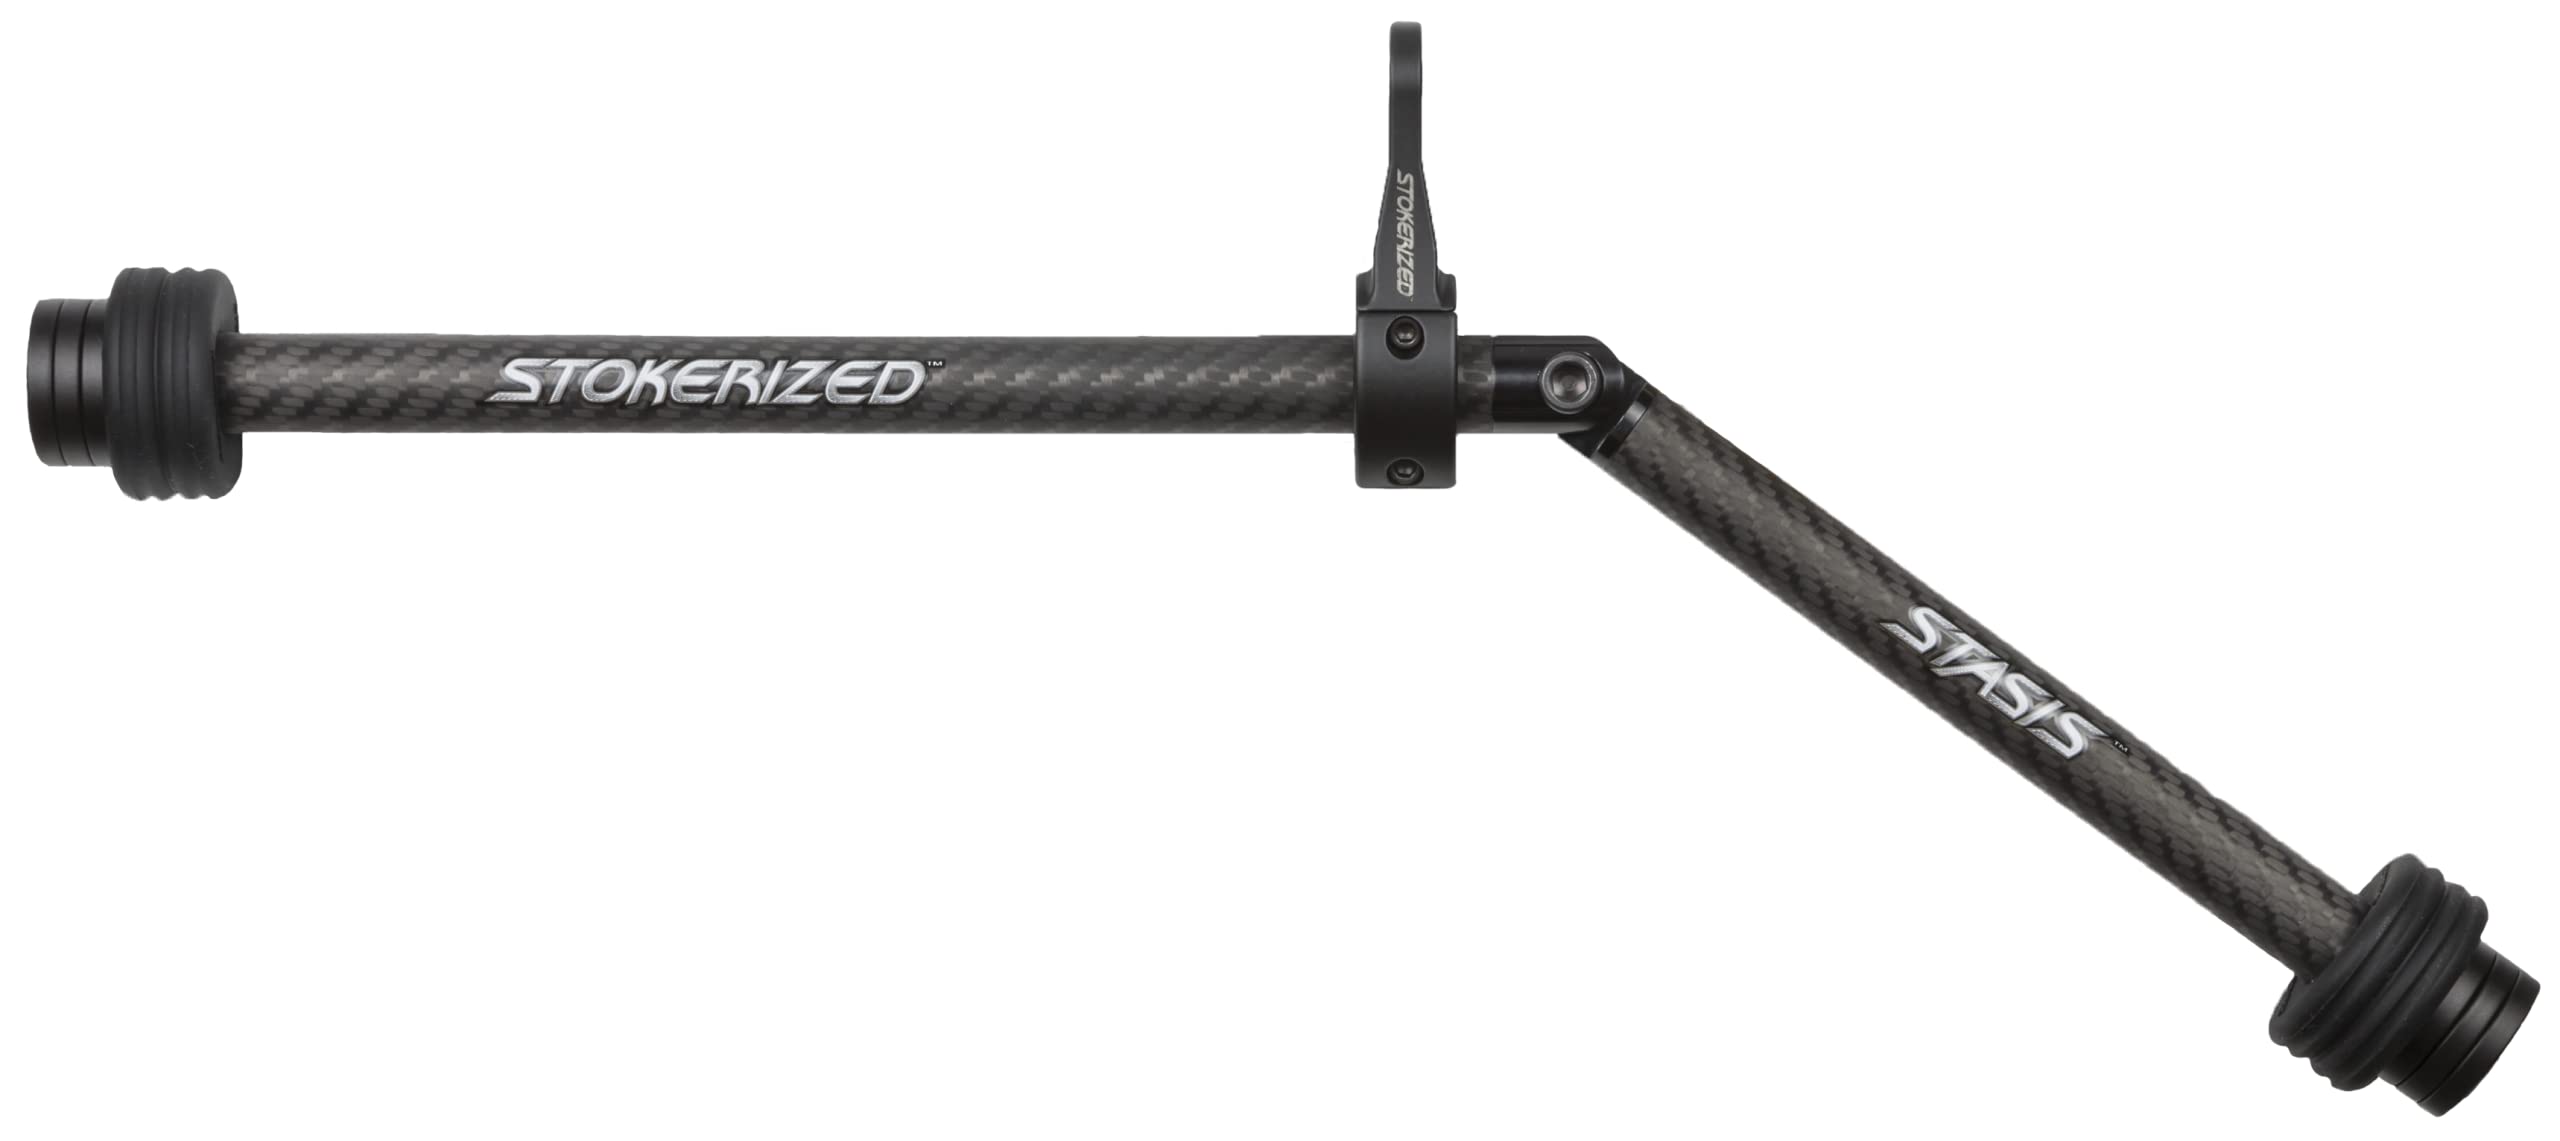 Stokerized Stabilizers Super Lite(SL) Carbon Hunting 19